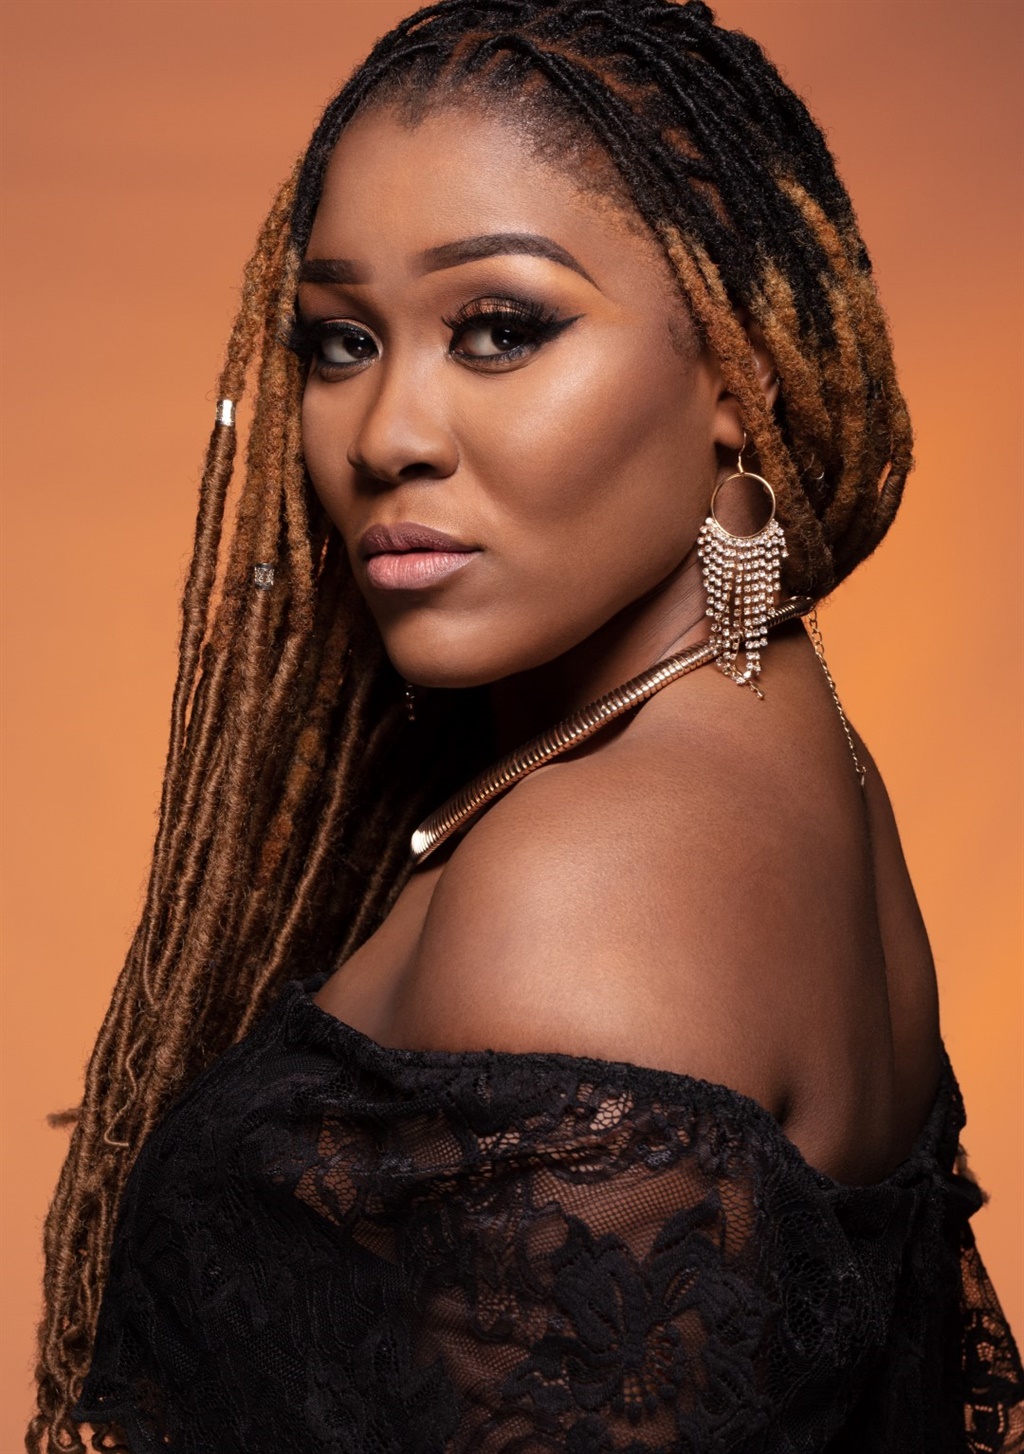  Lady Zamar announced that she has withdrawn from a concert featuring her ex, Sjava.